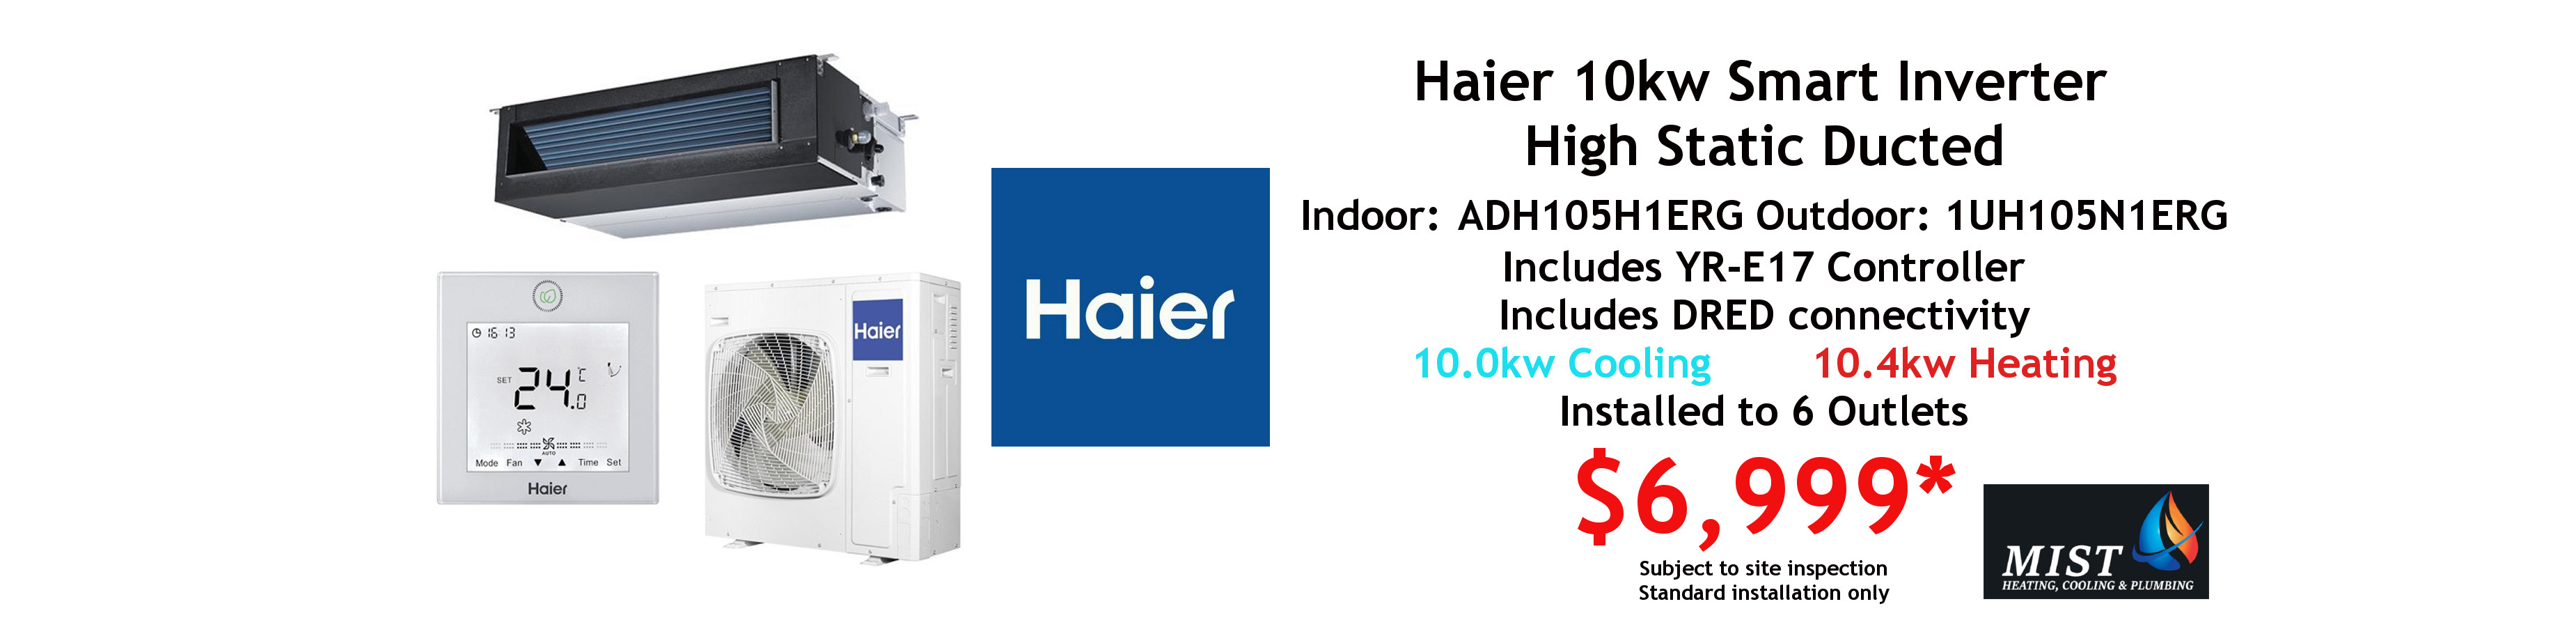 haier 10kw ducted special